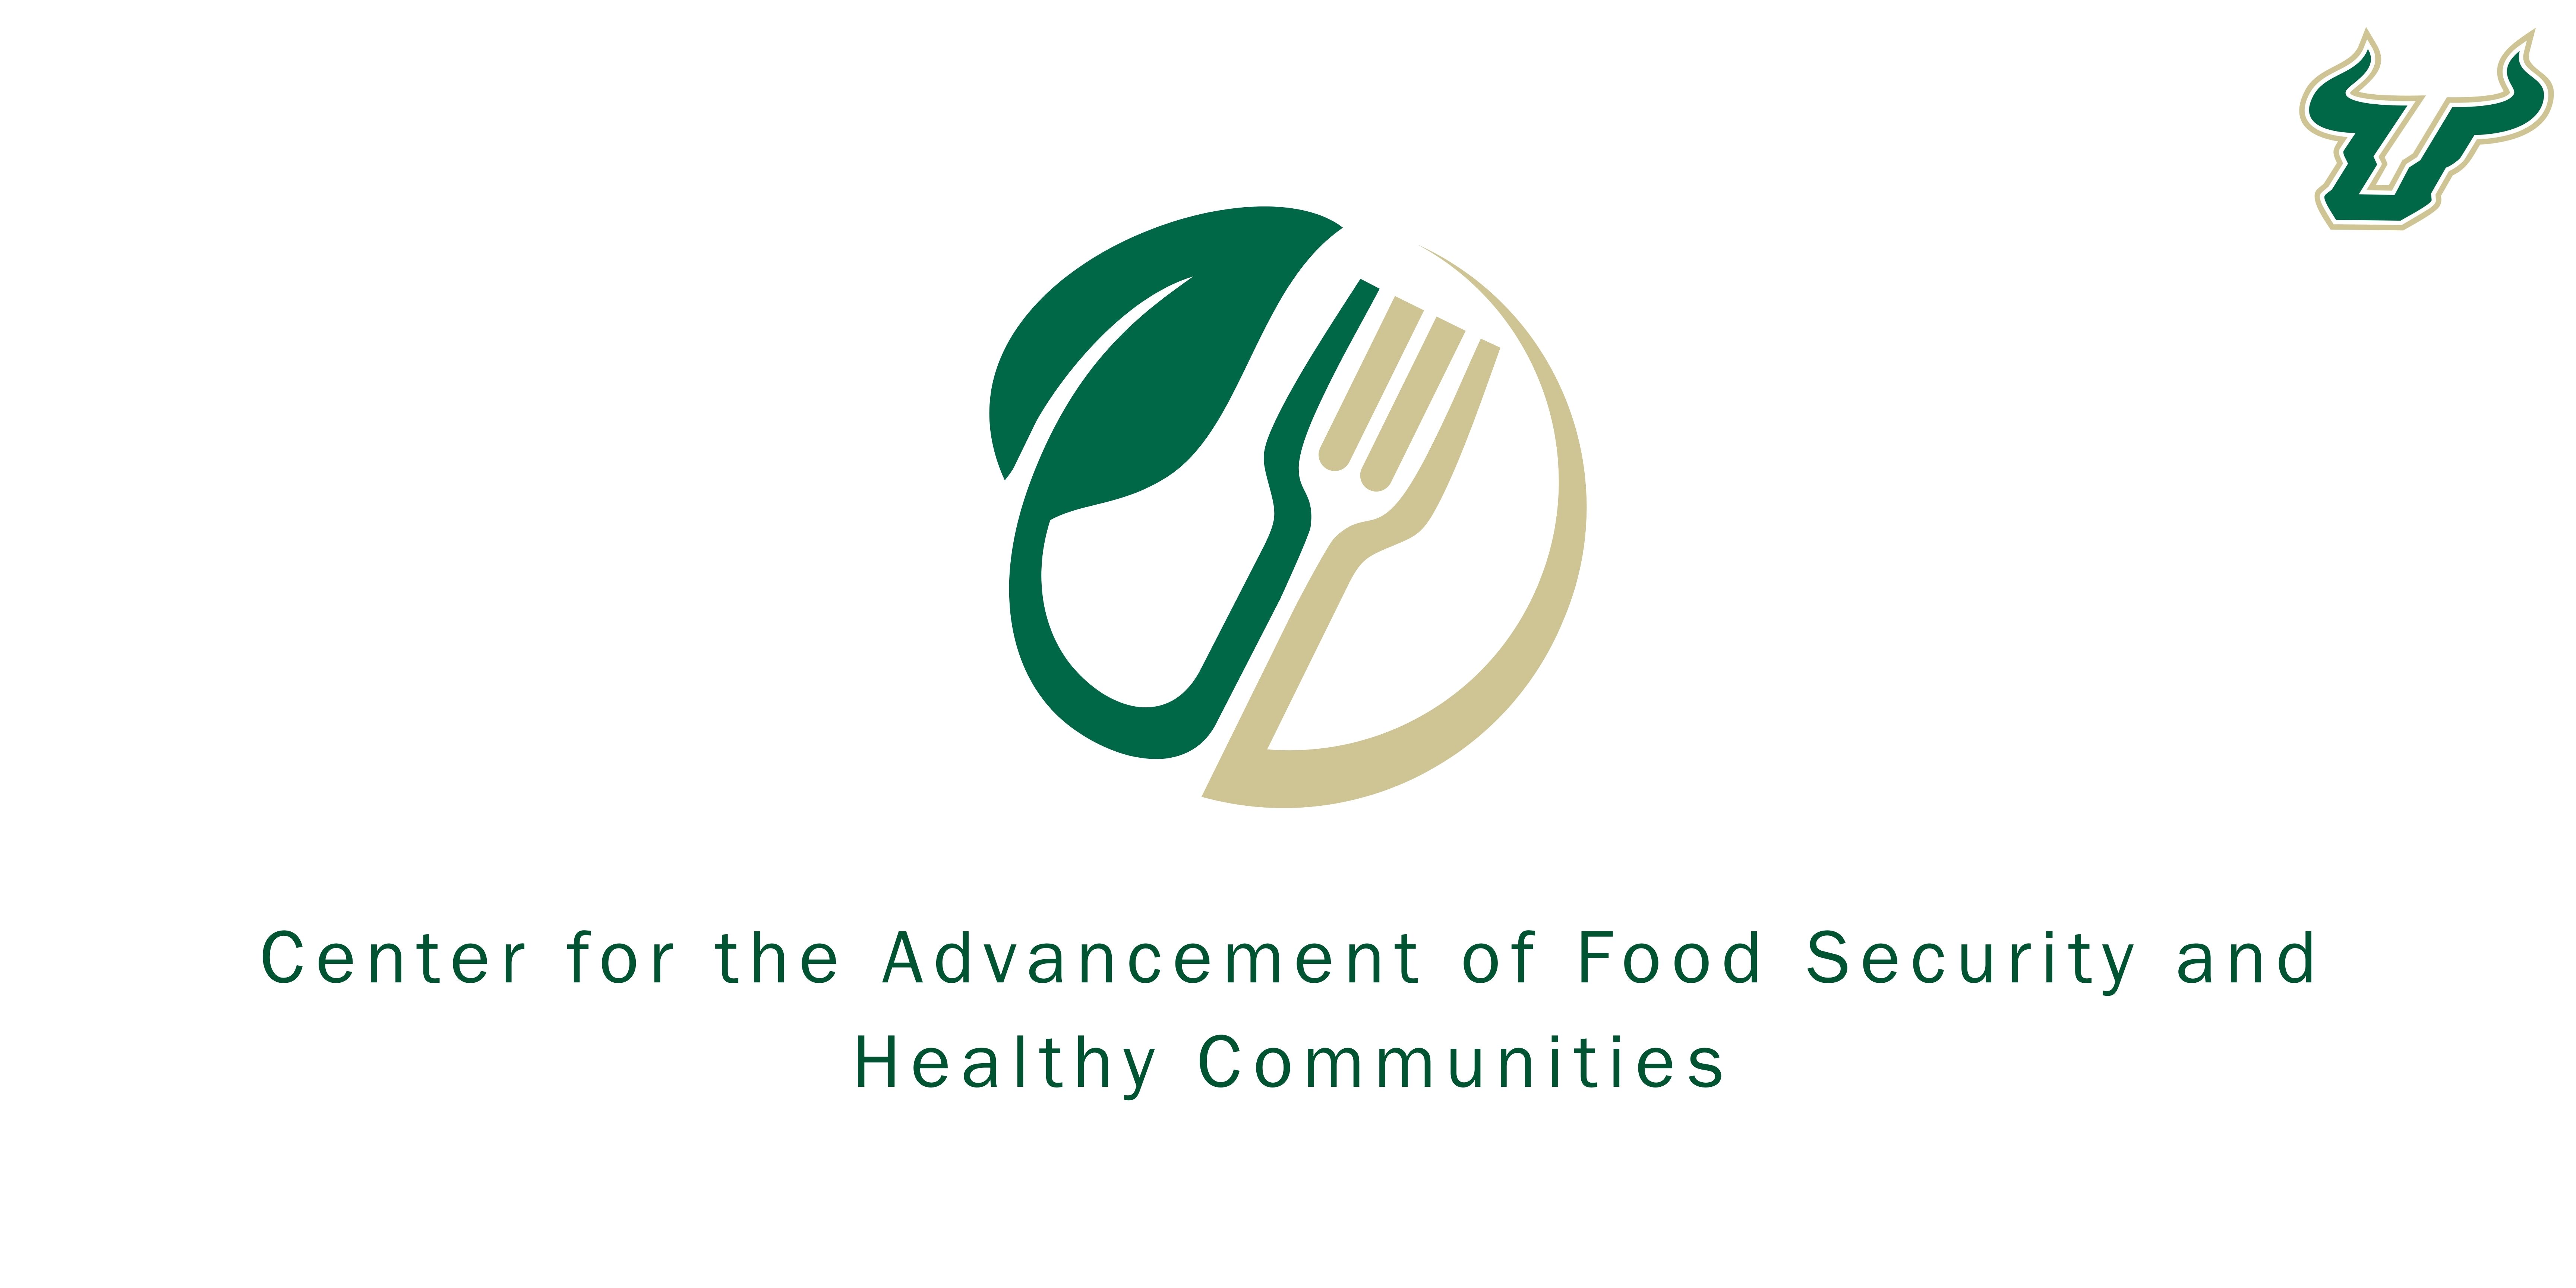 Center for the Advancement of Food Security and Healthy Communities